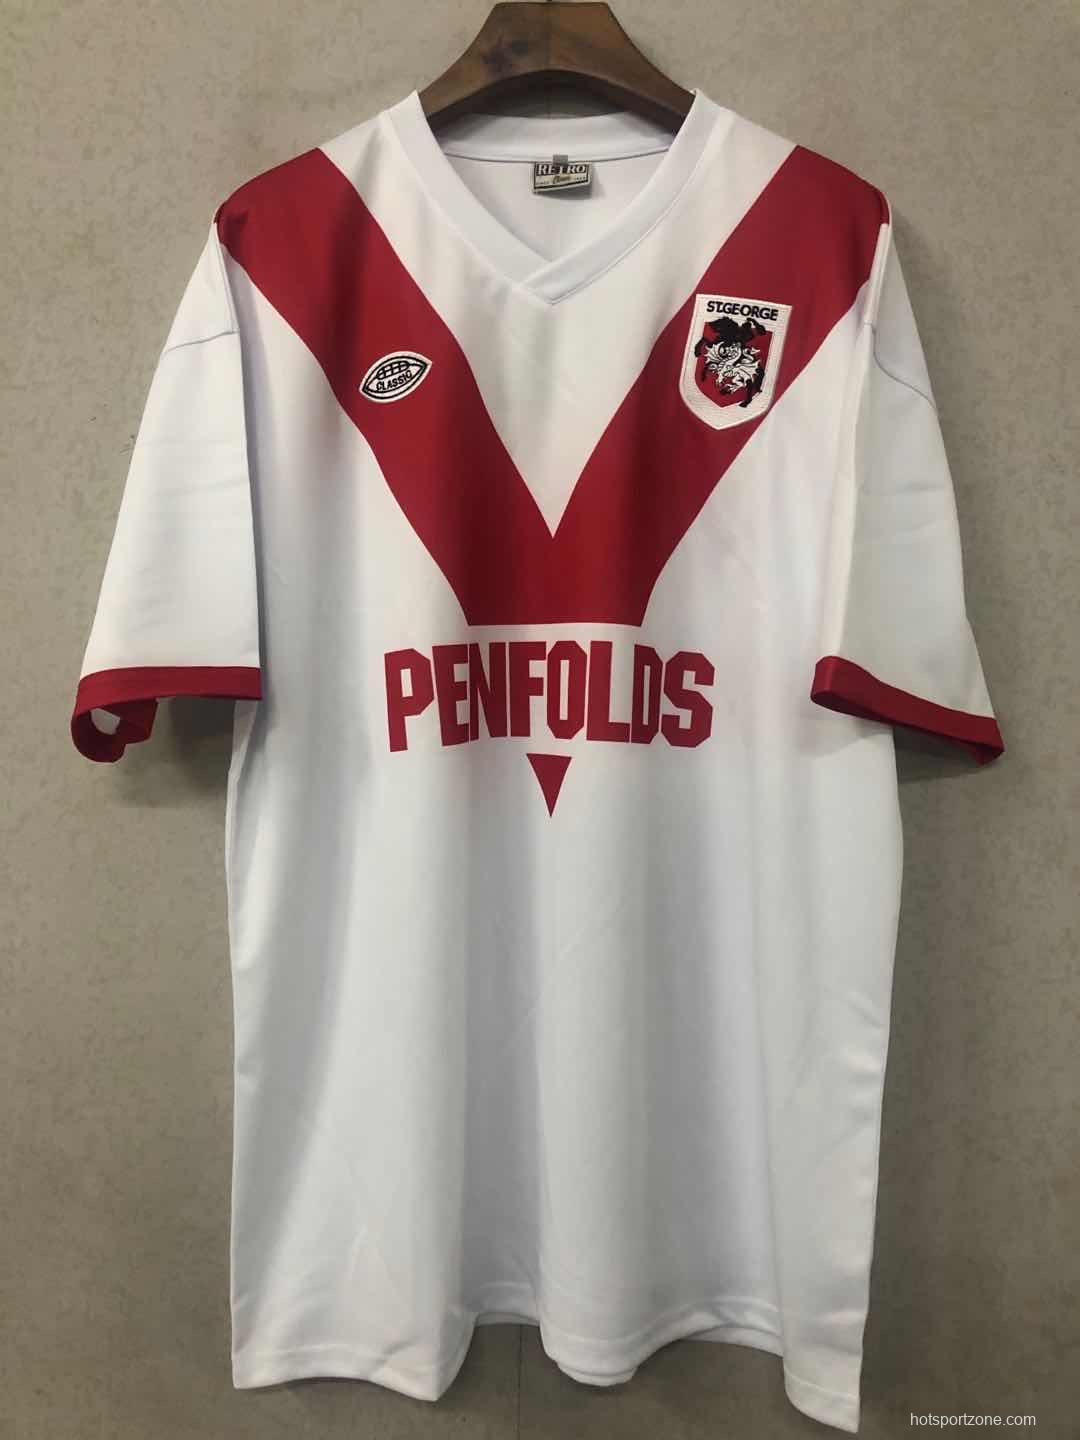 St George Dragons 1979 Retro Rugby League Jersey